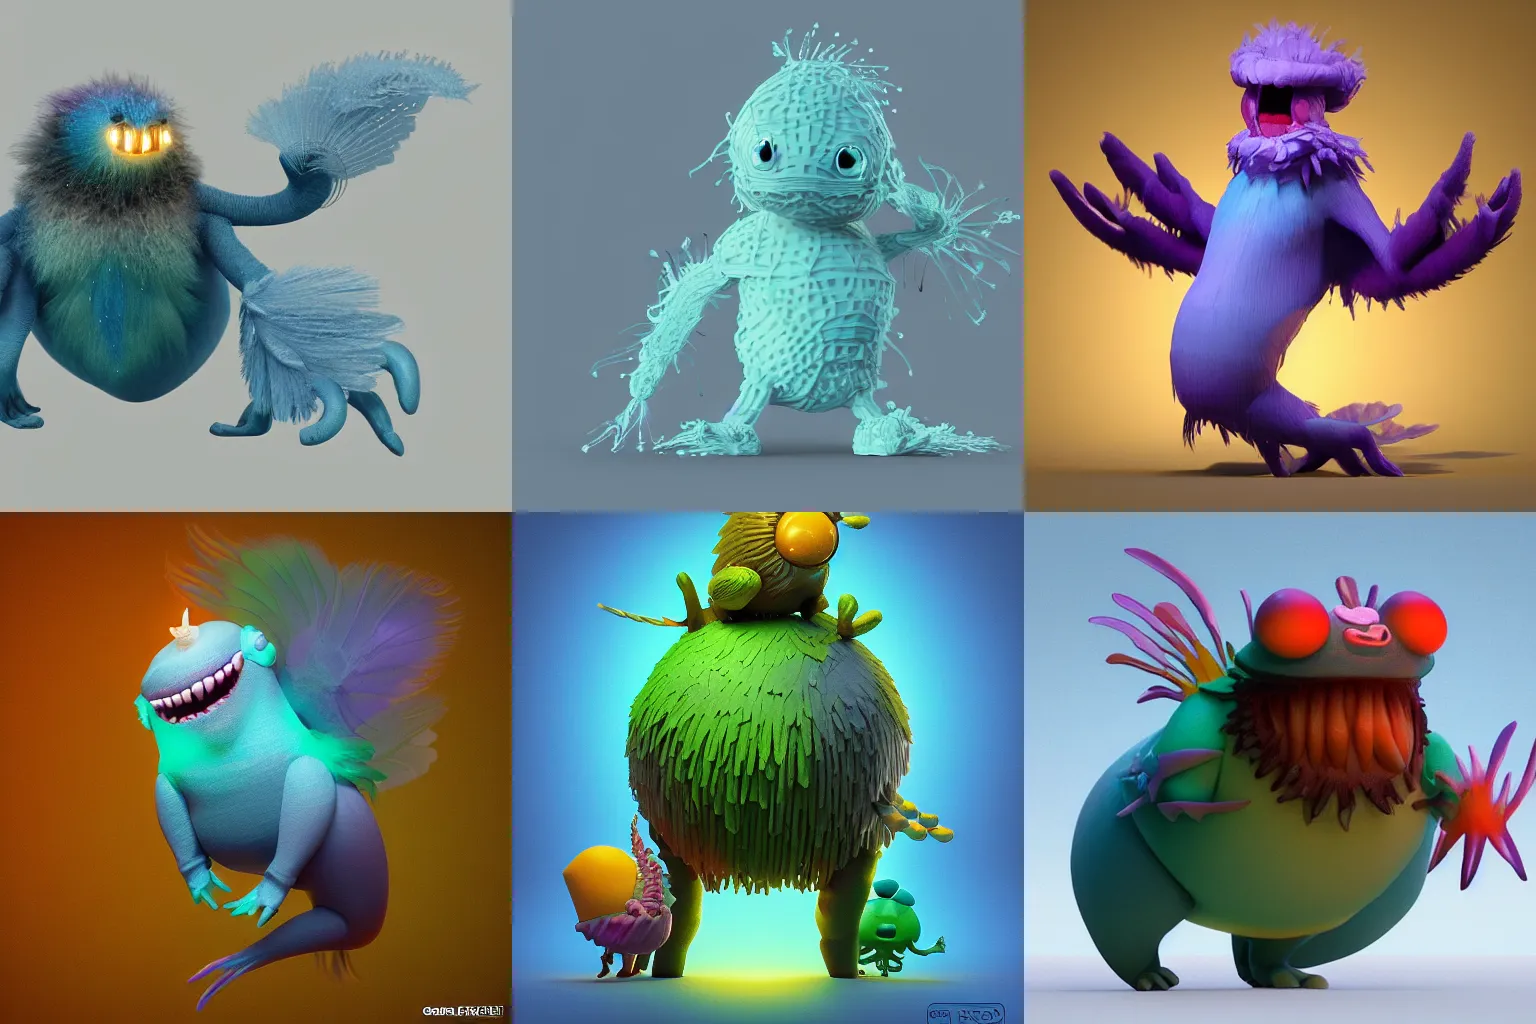 Prompt: cute! c4d, unreal engine, pixar, voxelart, rimlight, jelly fish dancing, fighting, bioluminescent screaming feathers pictoplasma characterdesign toydesign toy monster bird of paradise creature, zbrush, octane, hardsurface modelling, artstation, cg society, by greg rutkowksi, by Eddie Mendoza, by Peter mohrbacher, by tooth wu